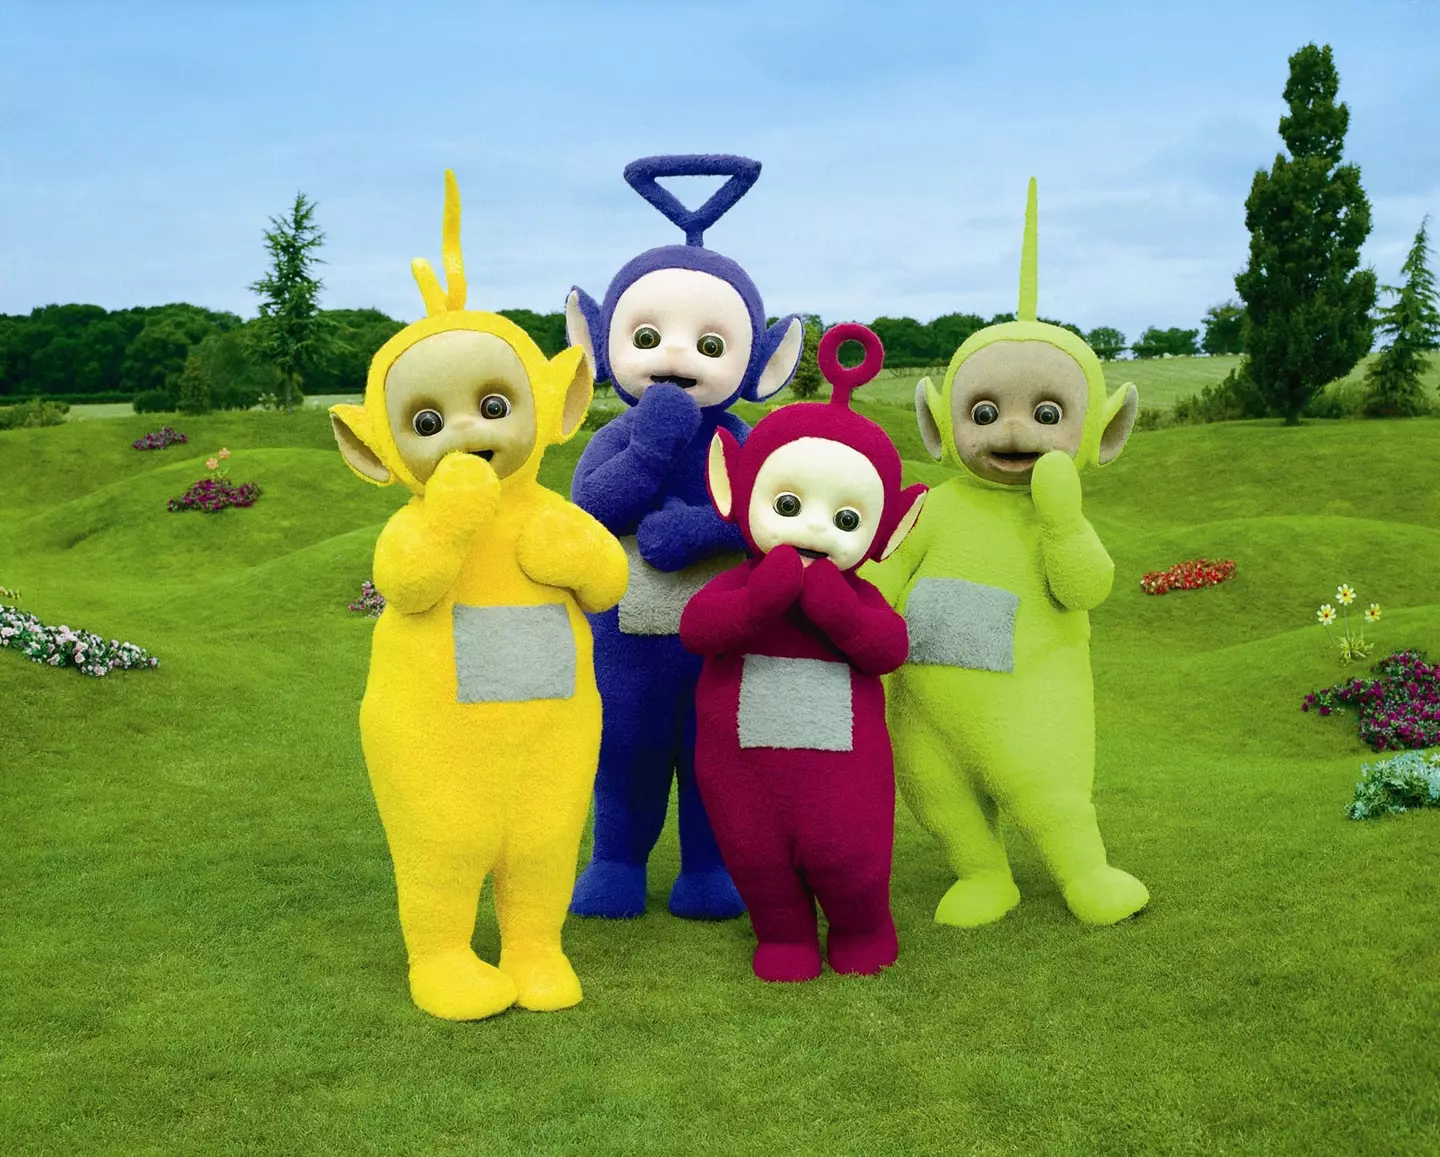 Rhys Frake-Waterfield wants to transform the Teletubbies into a horror film.